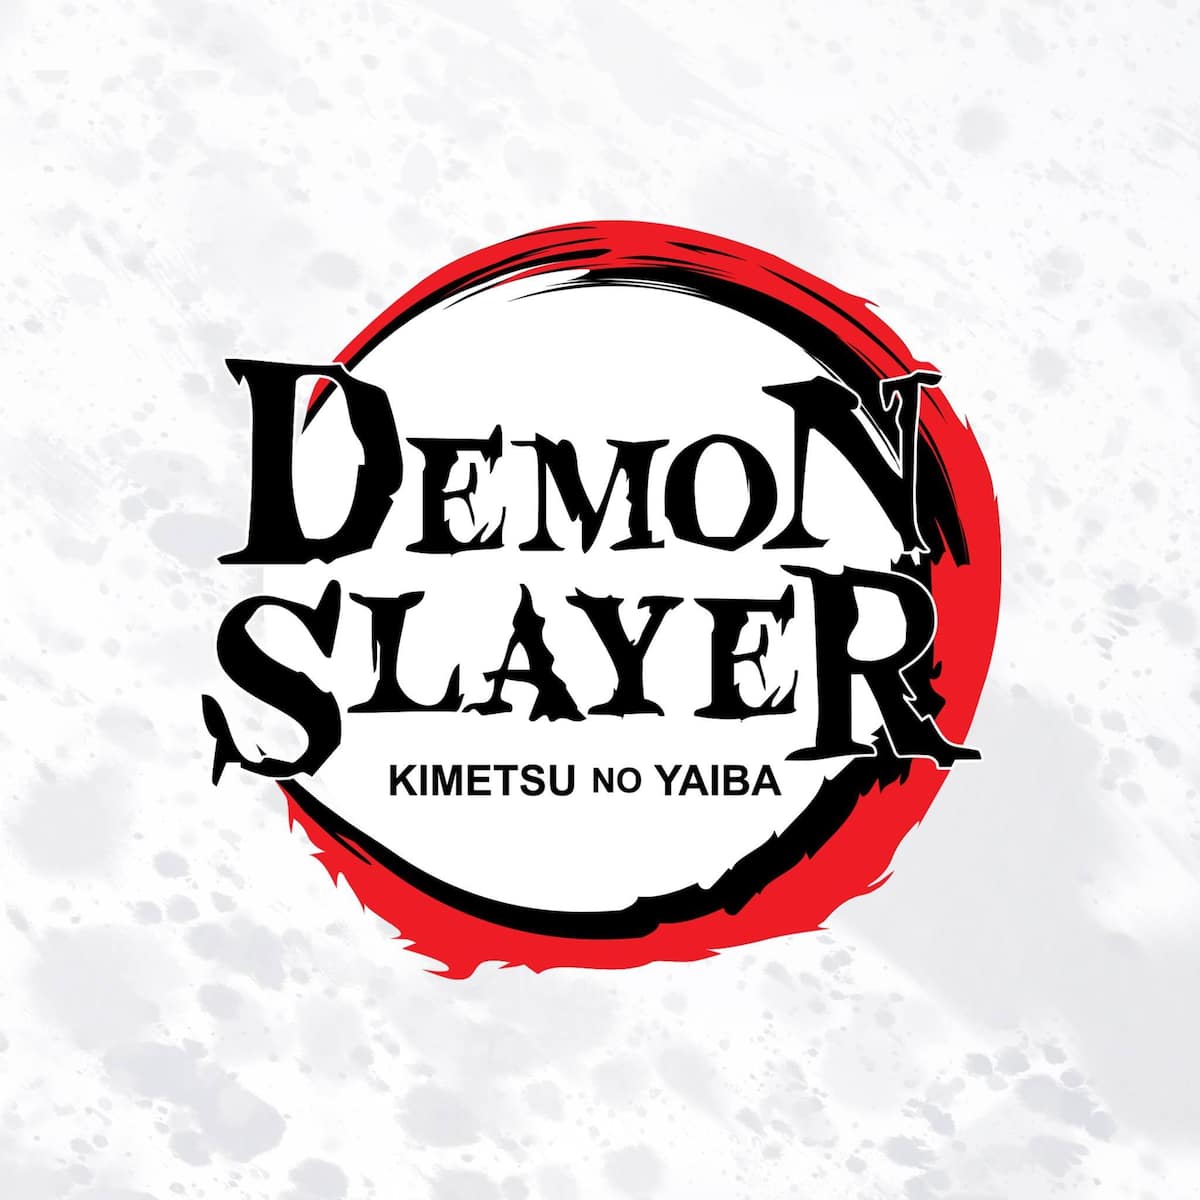 Is Your Demon Slayer Knowledge Up To Par? Test Yourself With My